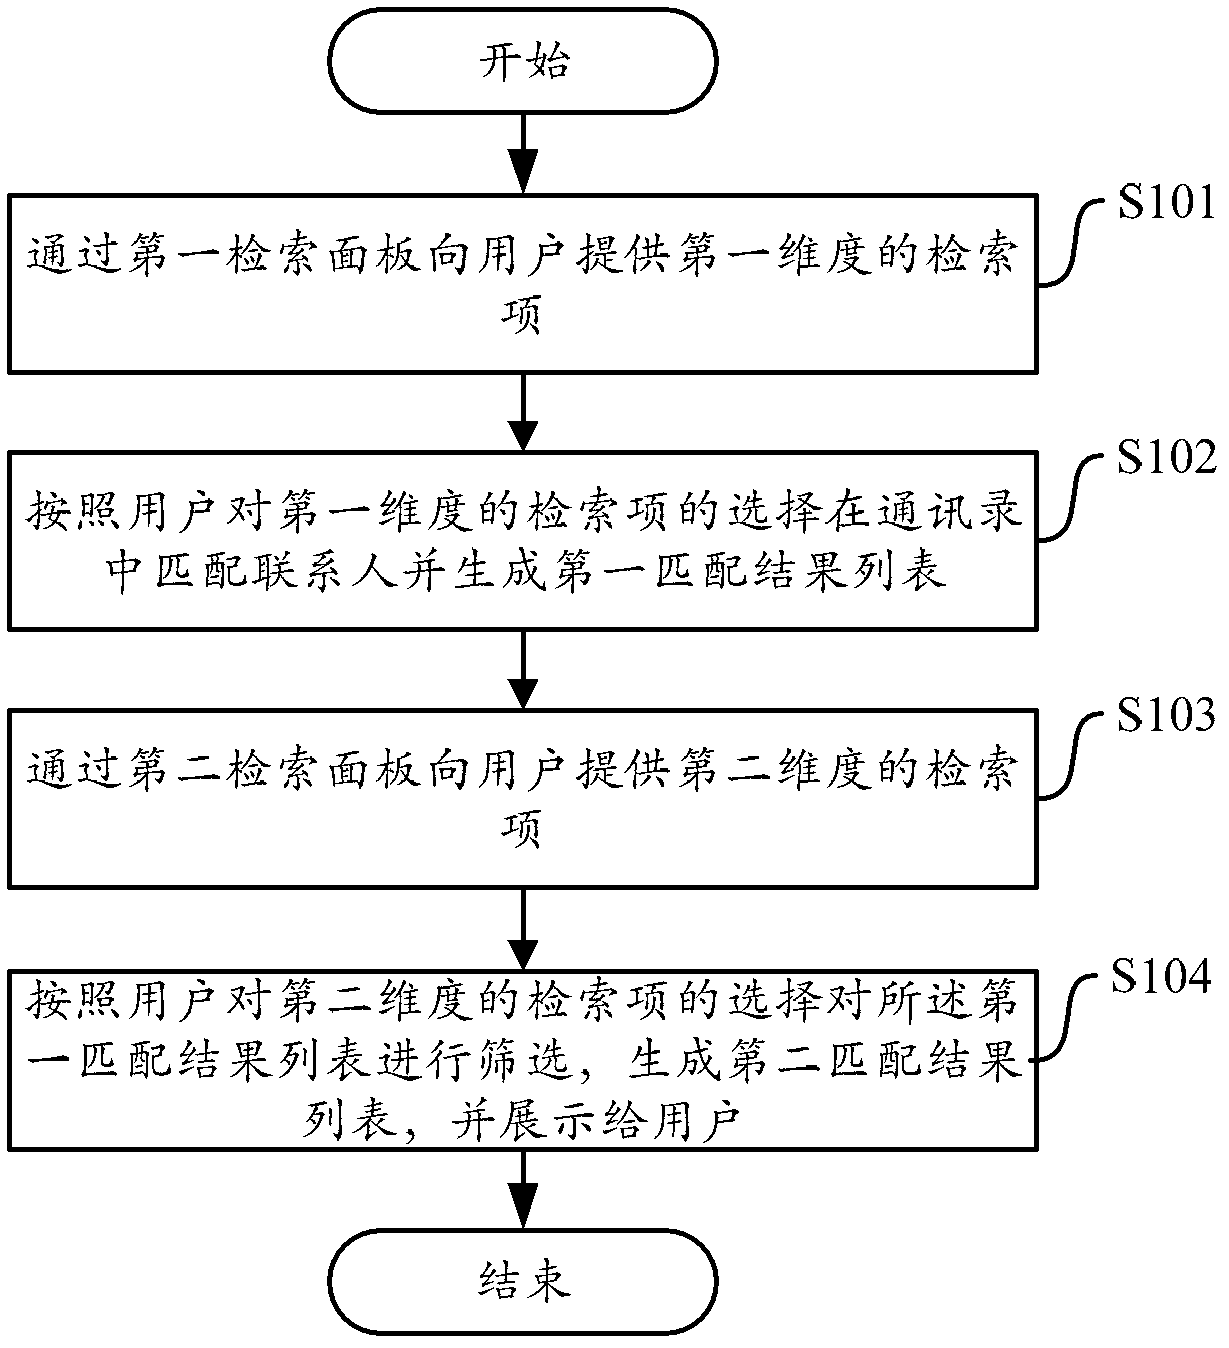 2D (two-dimensional) contact search method and device of search method